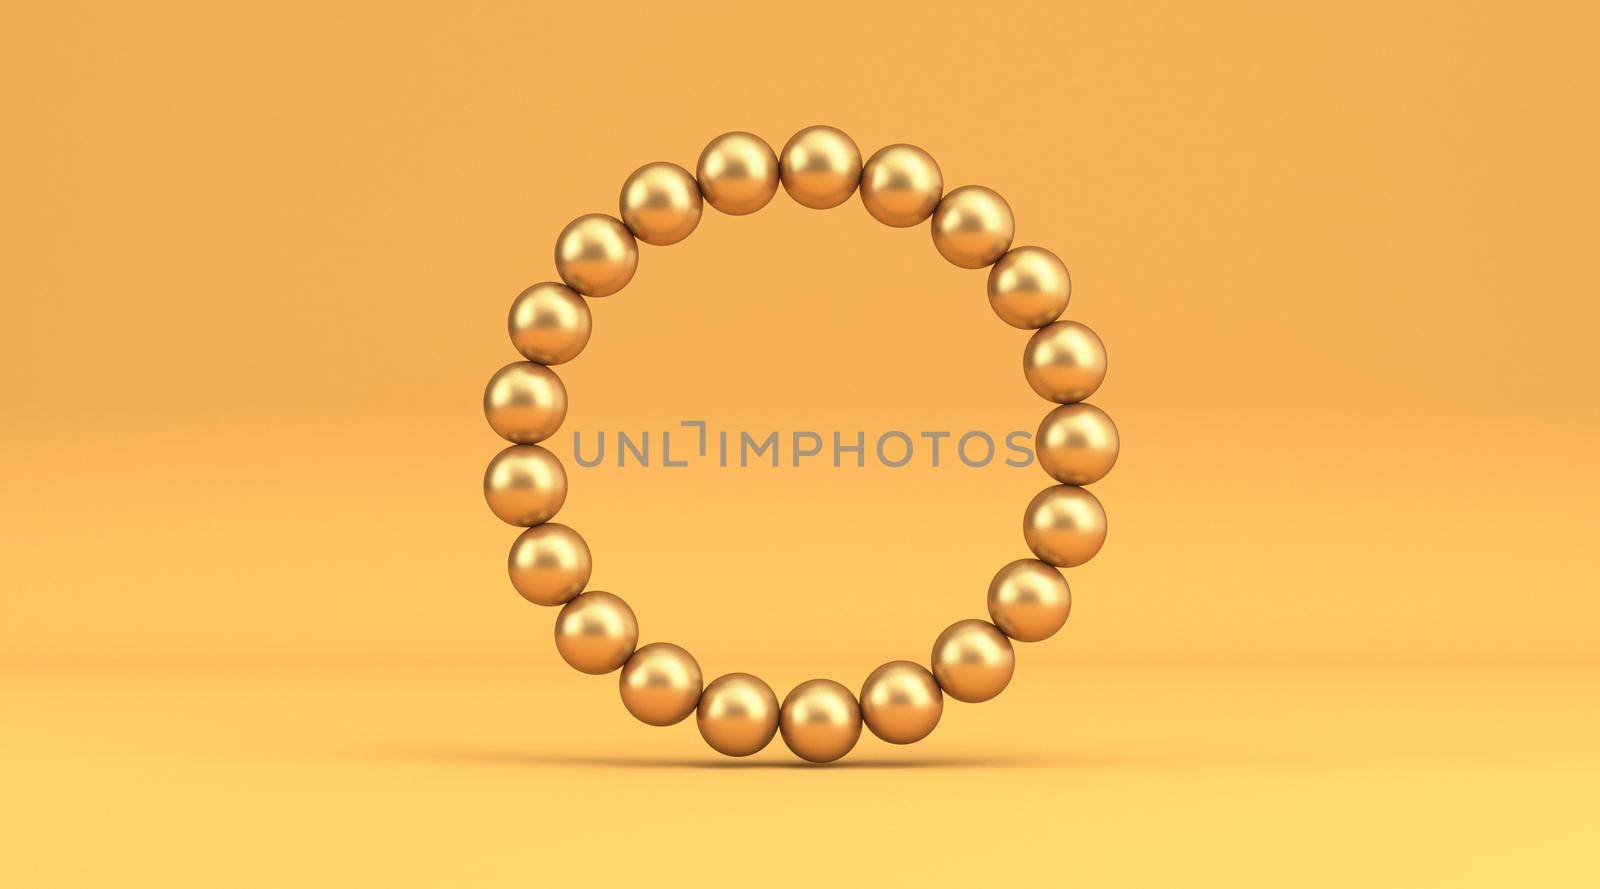 Golden pearl circle 3D rendering illustration isolated on yellow background